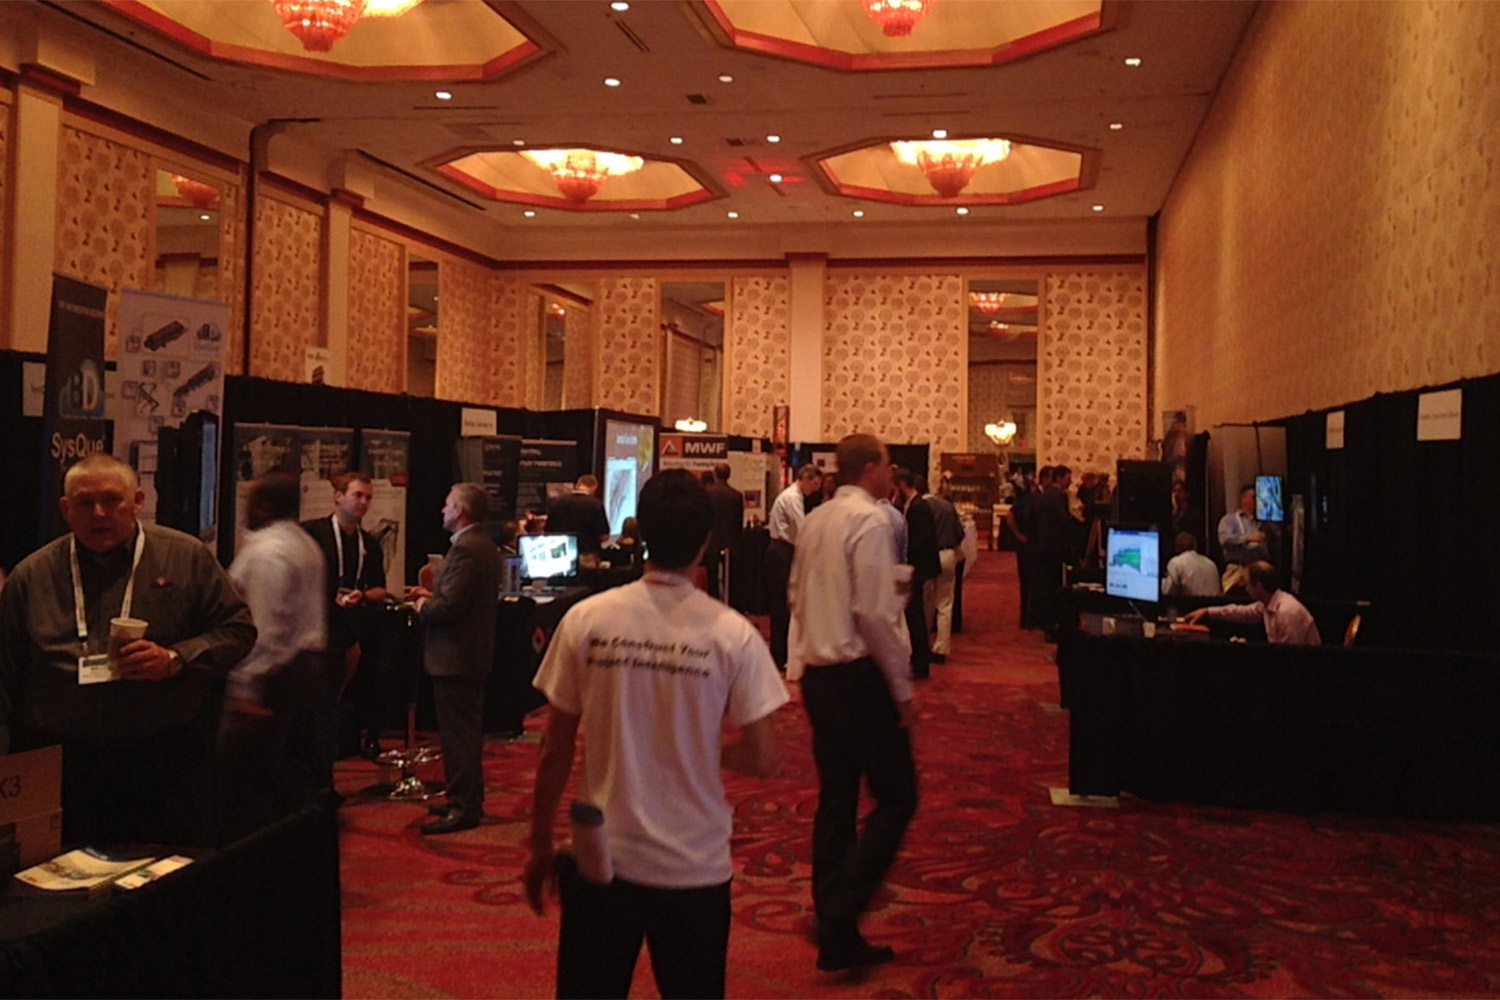 Some of the booths set up at the BIMForum. High walls with sconces. 